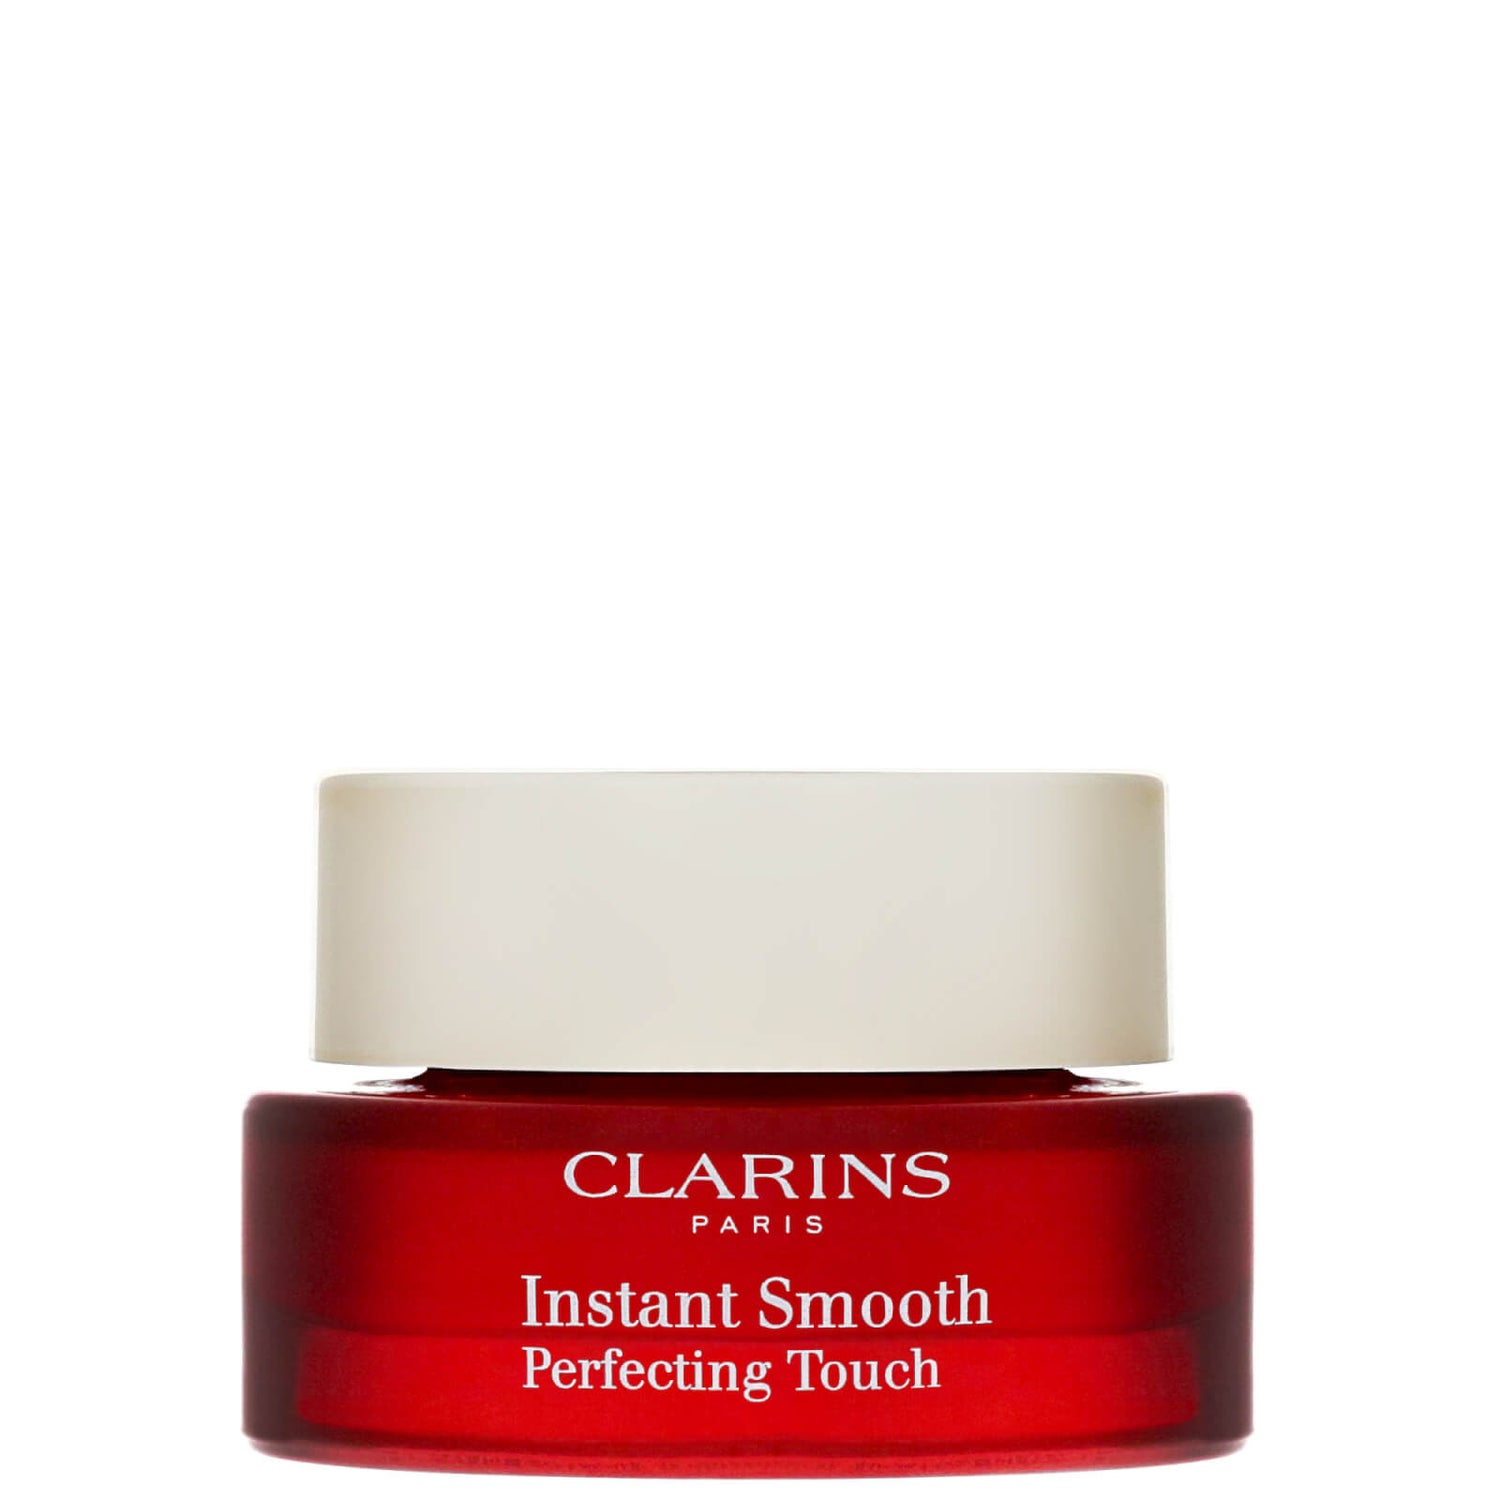 kom over Brød Ny ankomst Clarins Instant Smooth Perfecting Touch 15ml / 0.5 oz. - allbeauty